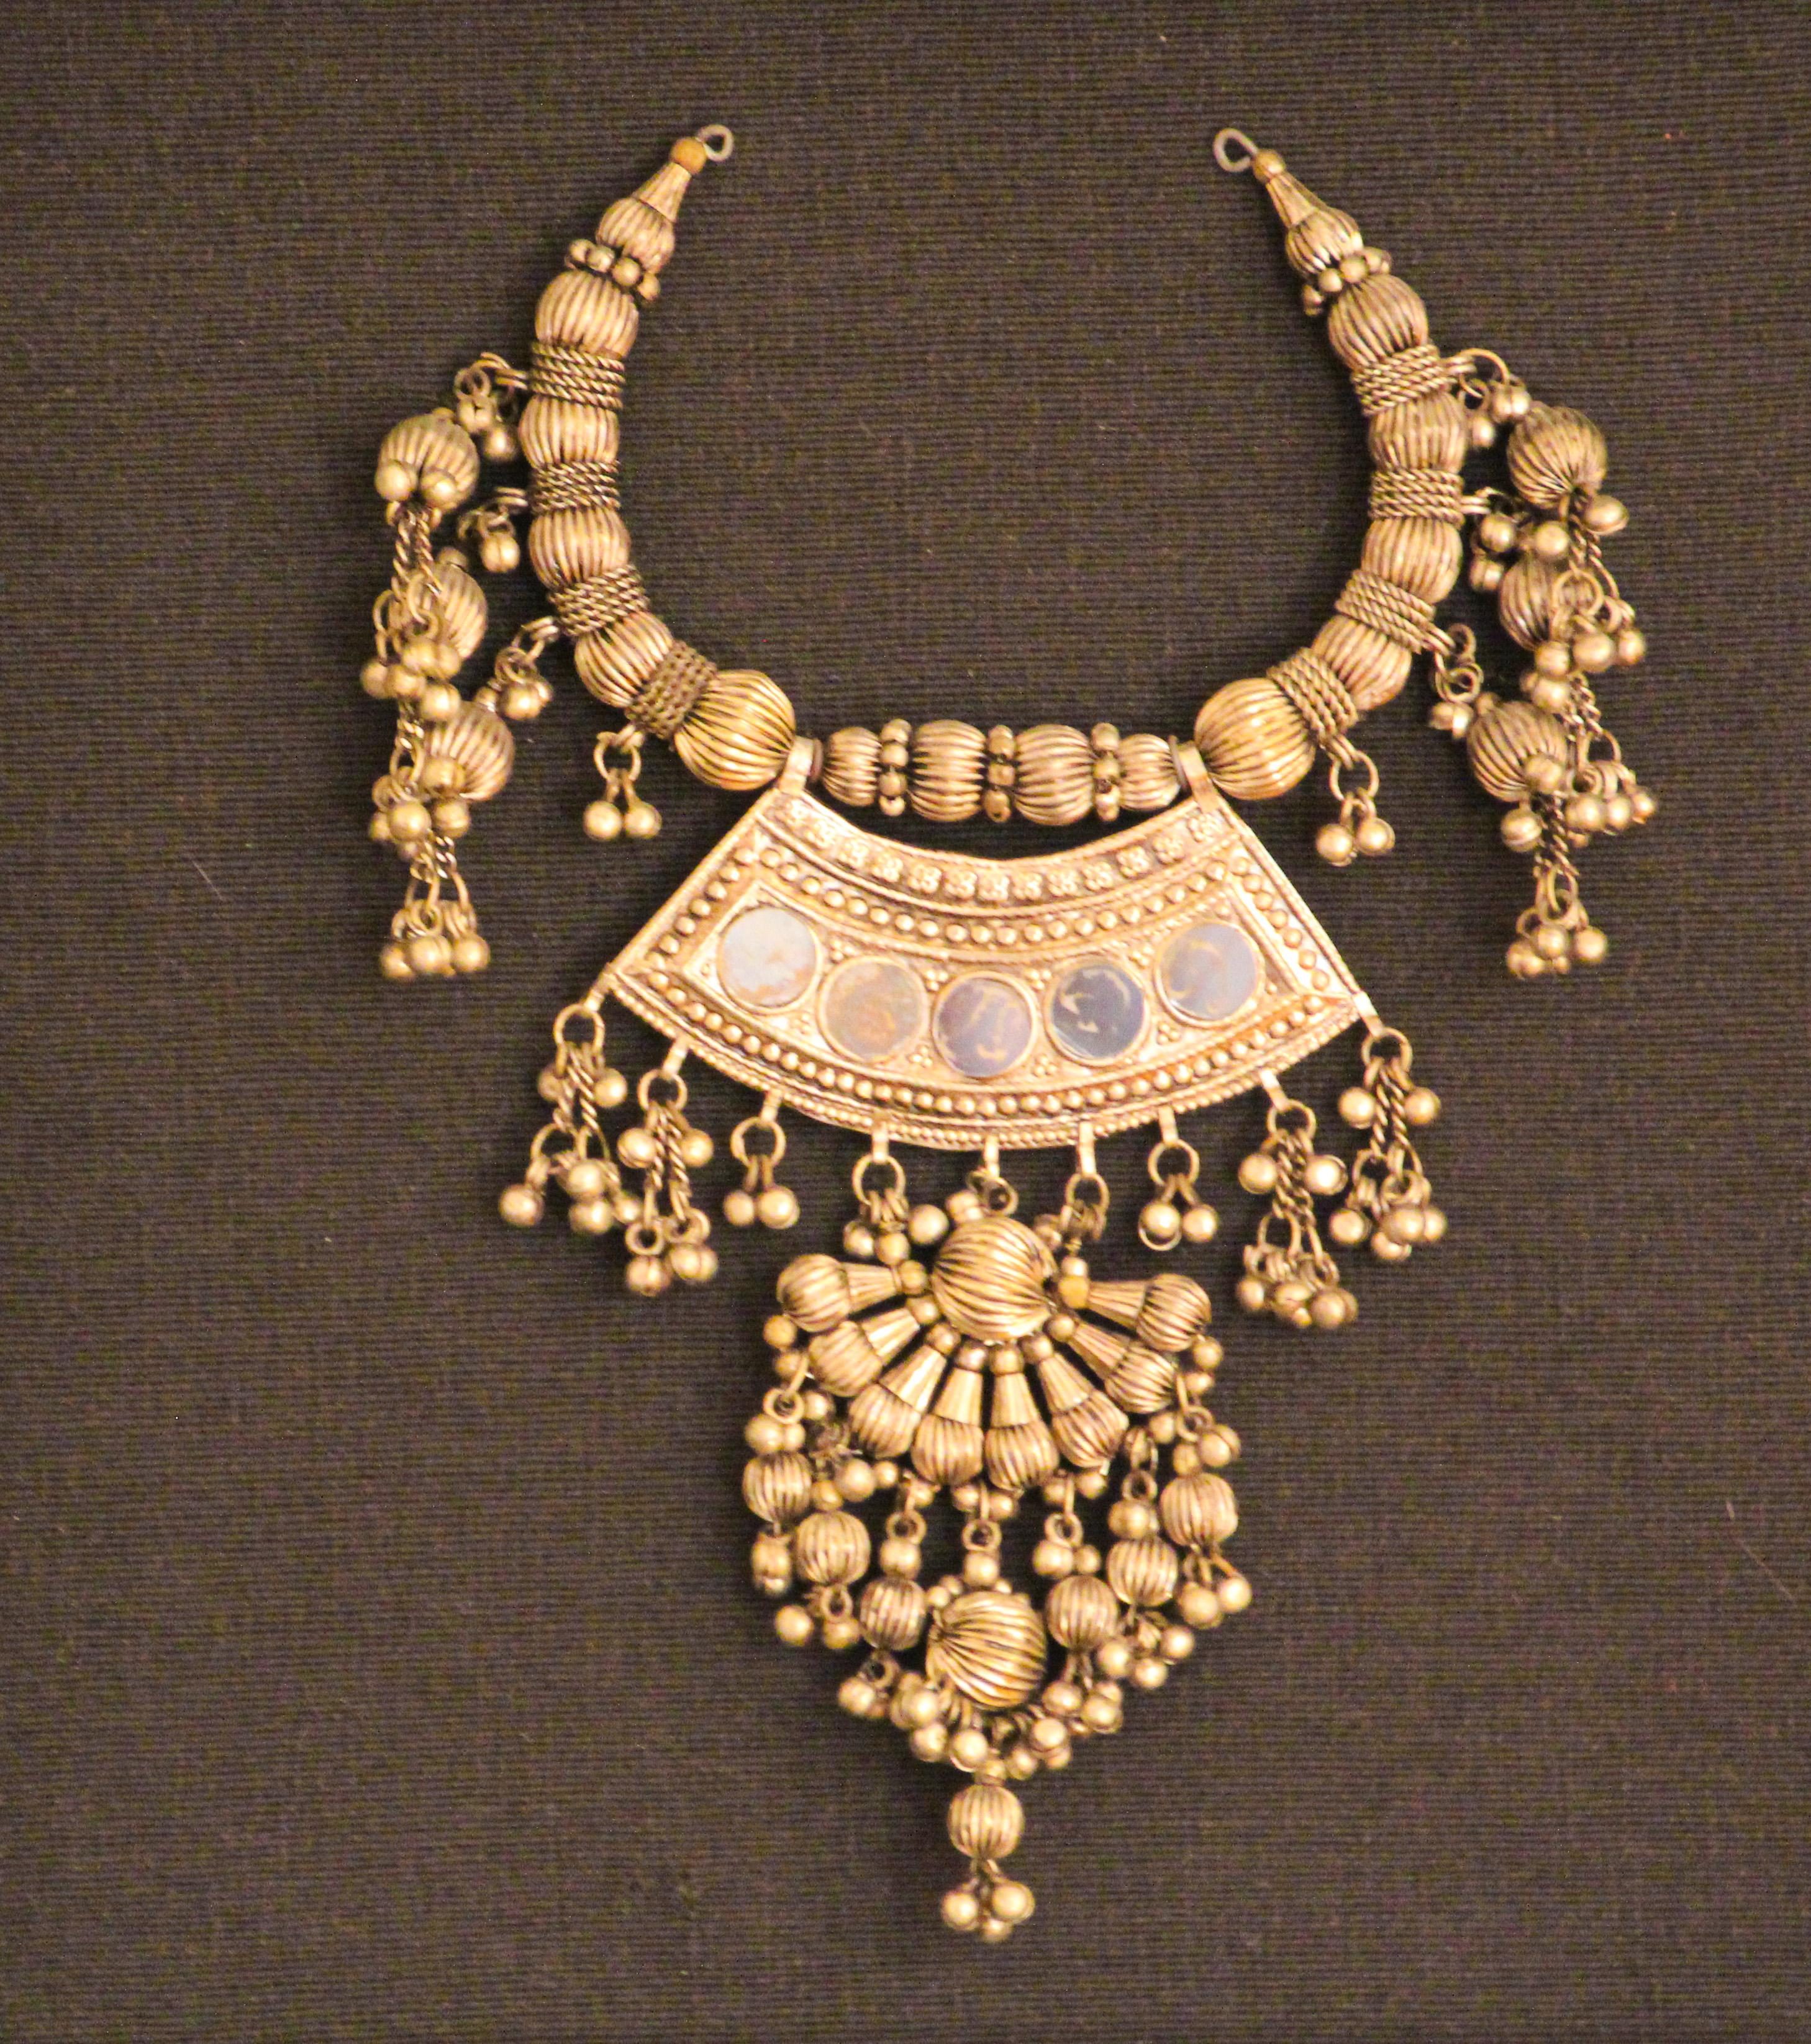 Anglo Raj Vintage Collectible Jewelry Ethnic Indian Necklace Framed For Sale